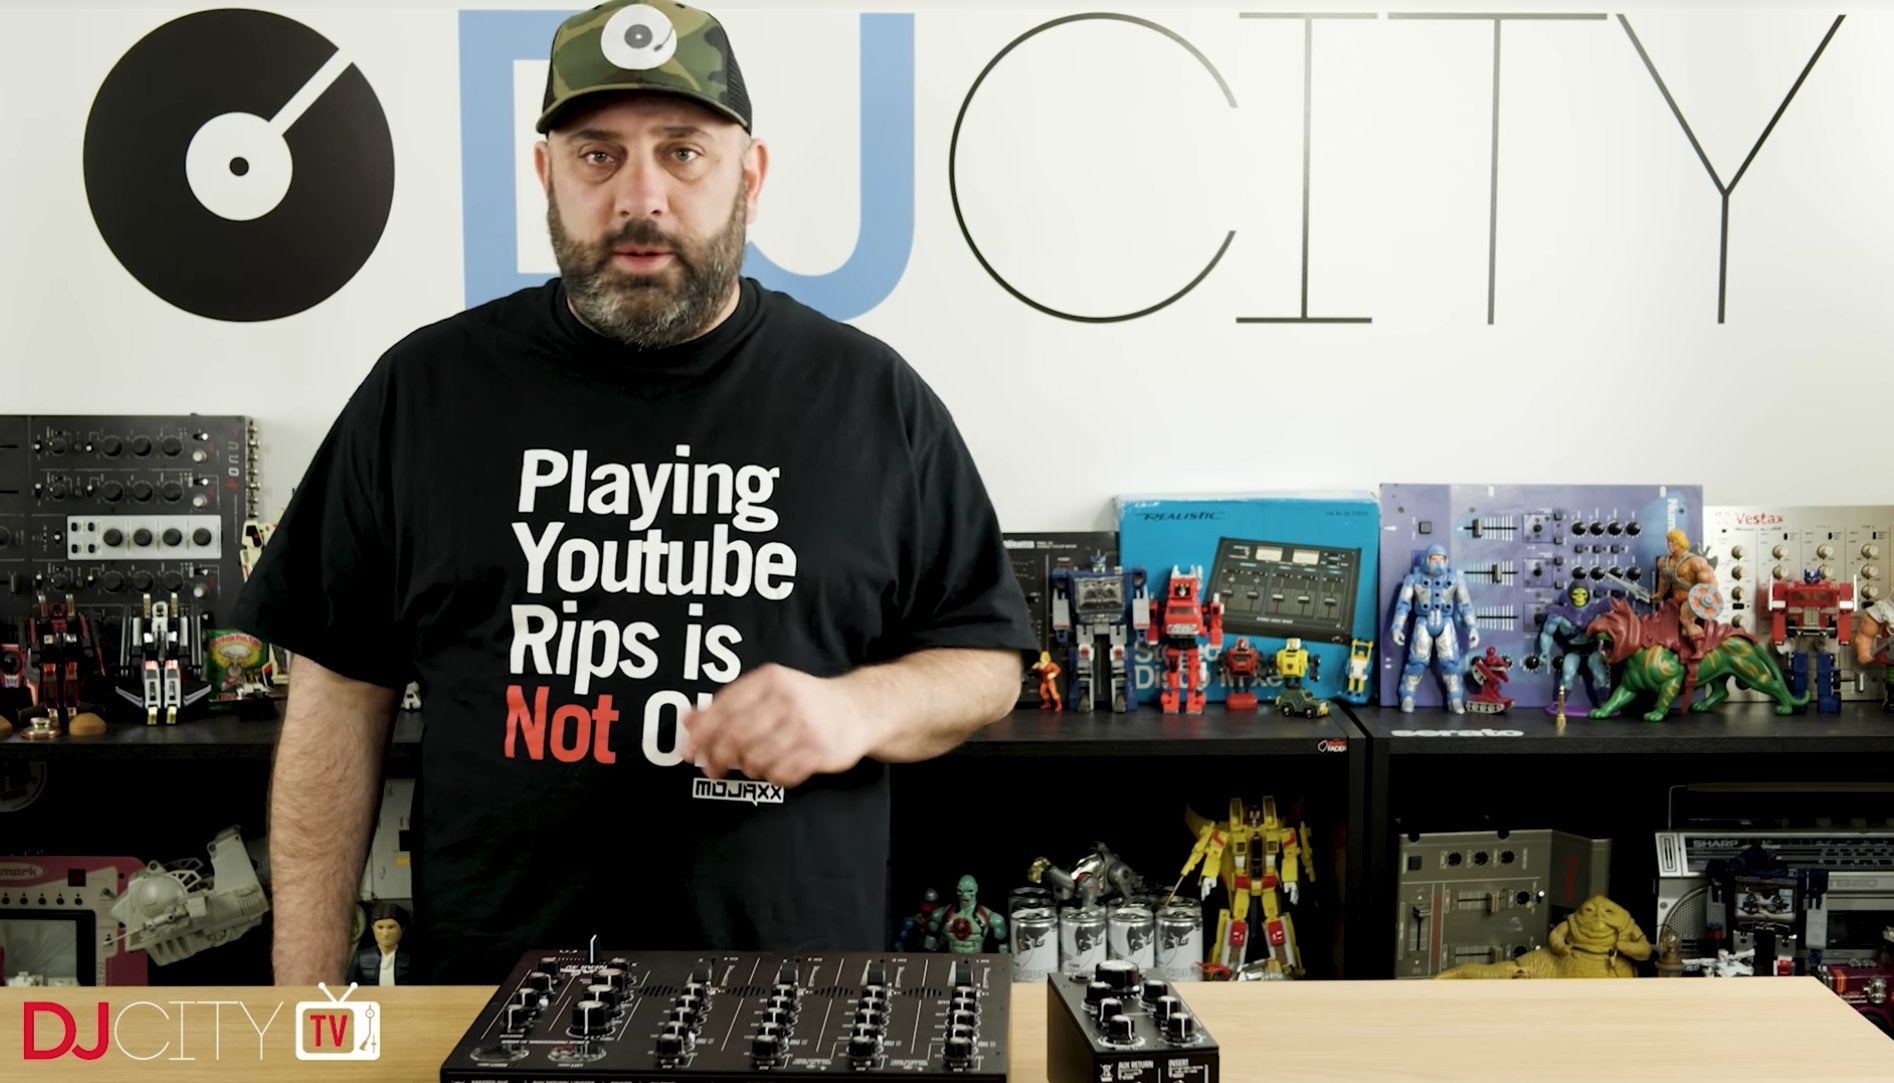 Mojaxx Reviews our Linear 4V and FX for DJ CITY YouTube Channel - MasterSounds